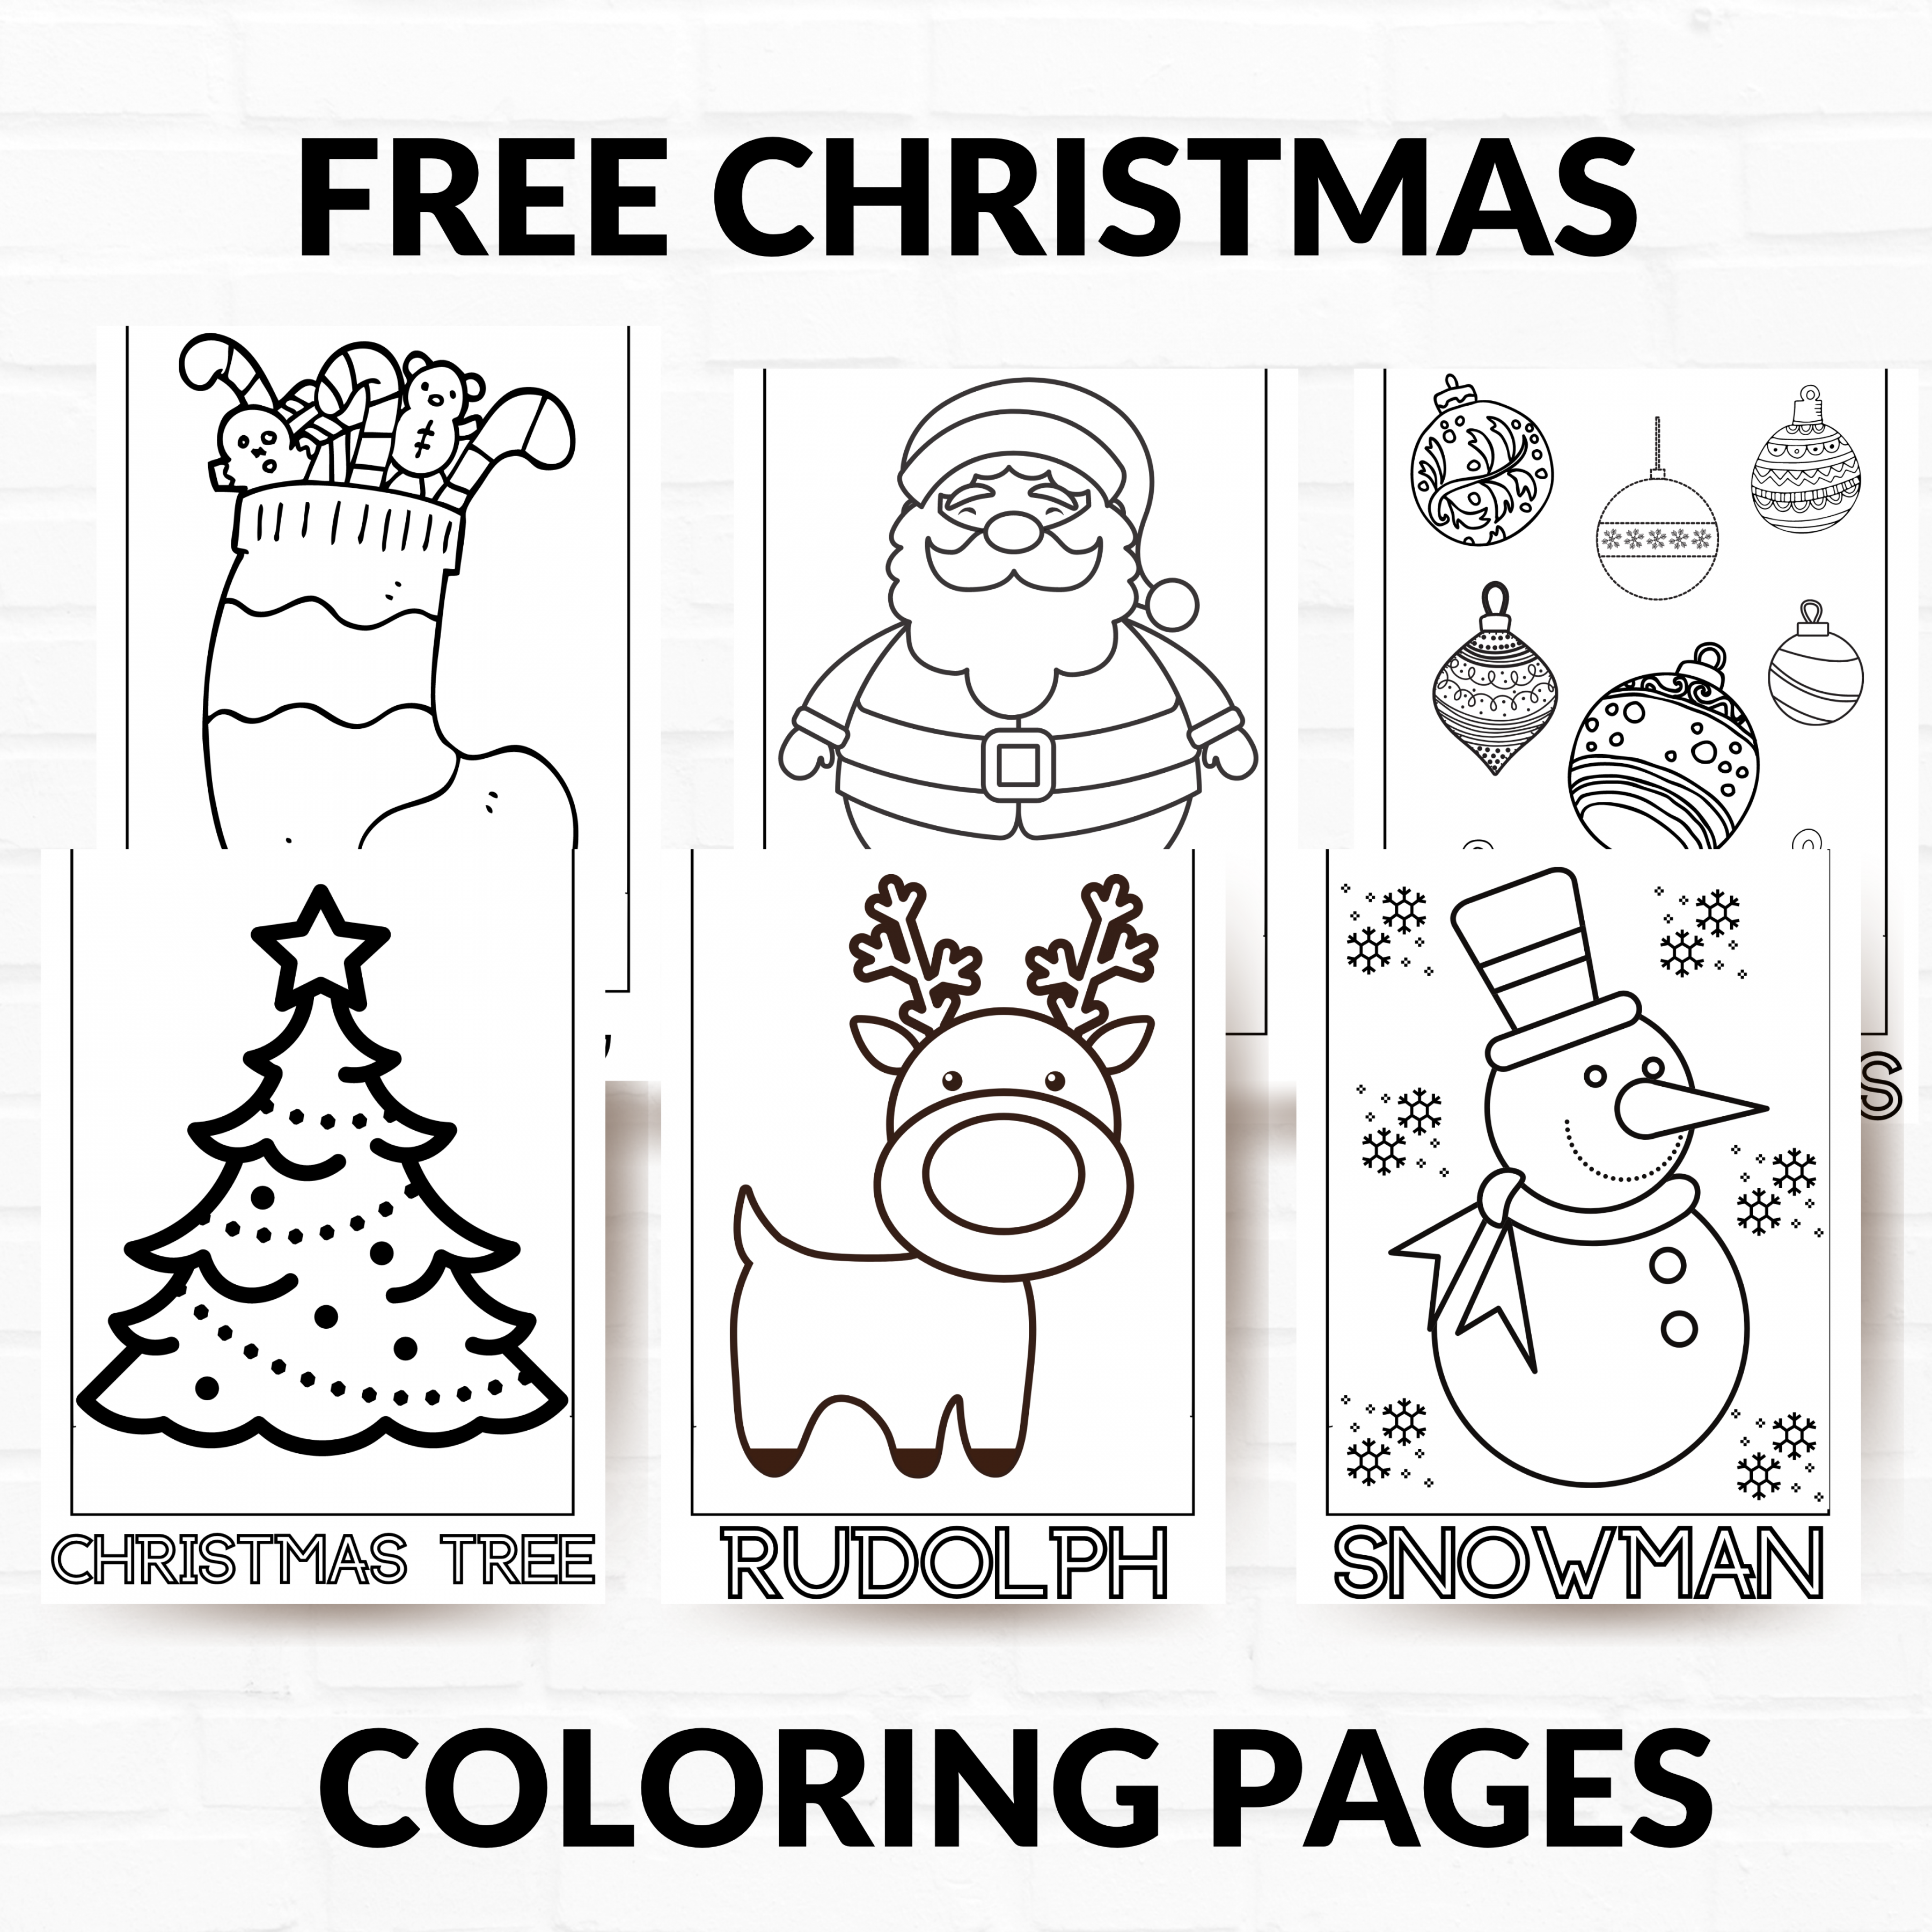 Free Christmas Printable Coloring Pages - Printable - Free Printable Christmas Coloring Pages - About a Mom